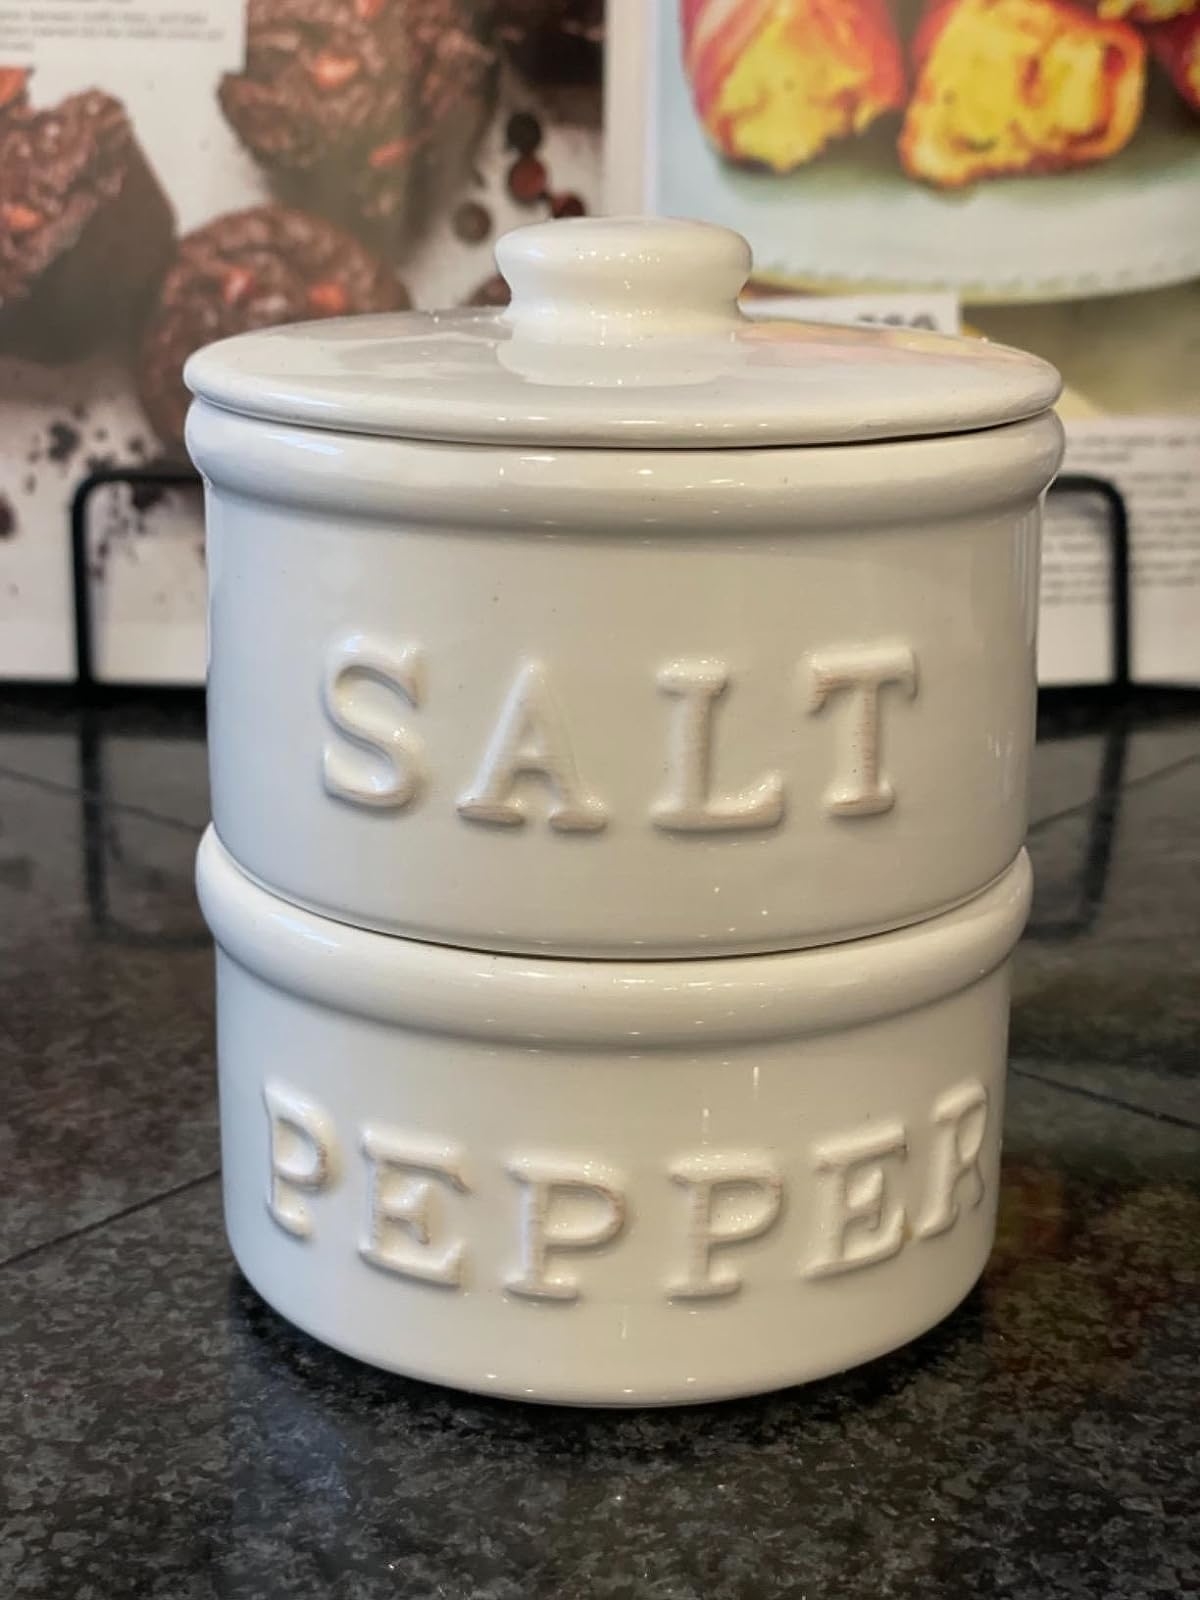 Reviewer image of the salt and pepper cellar on their countertop